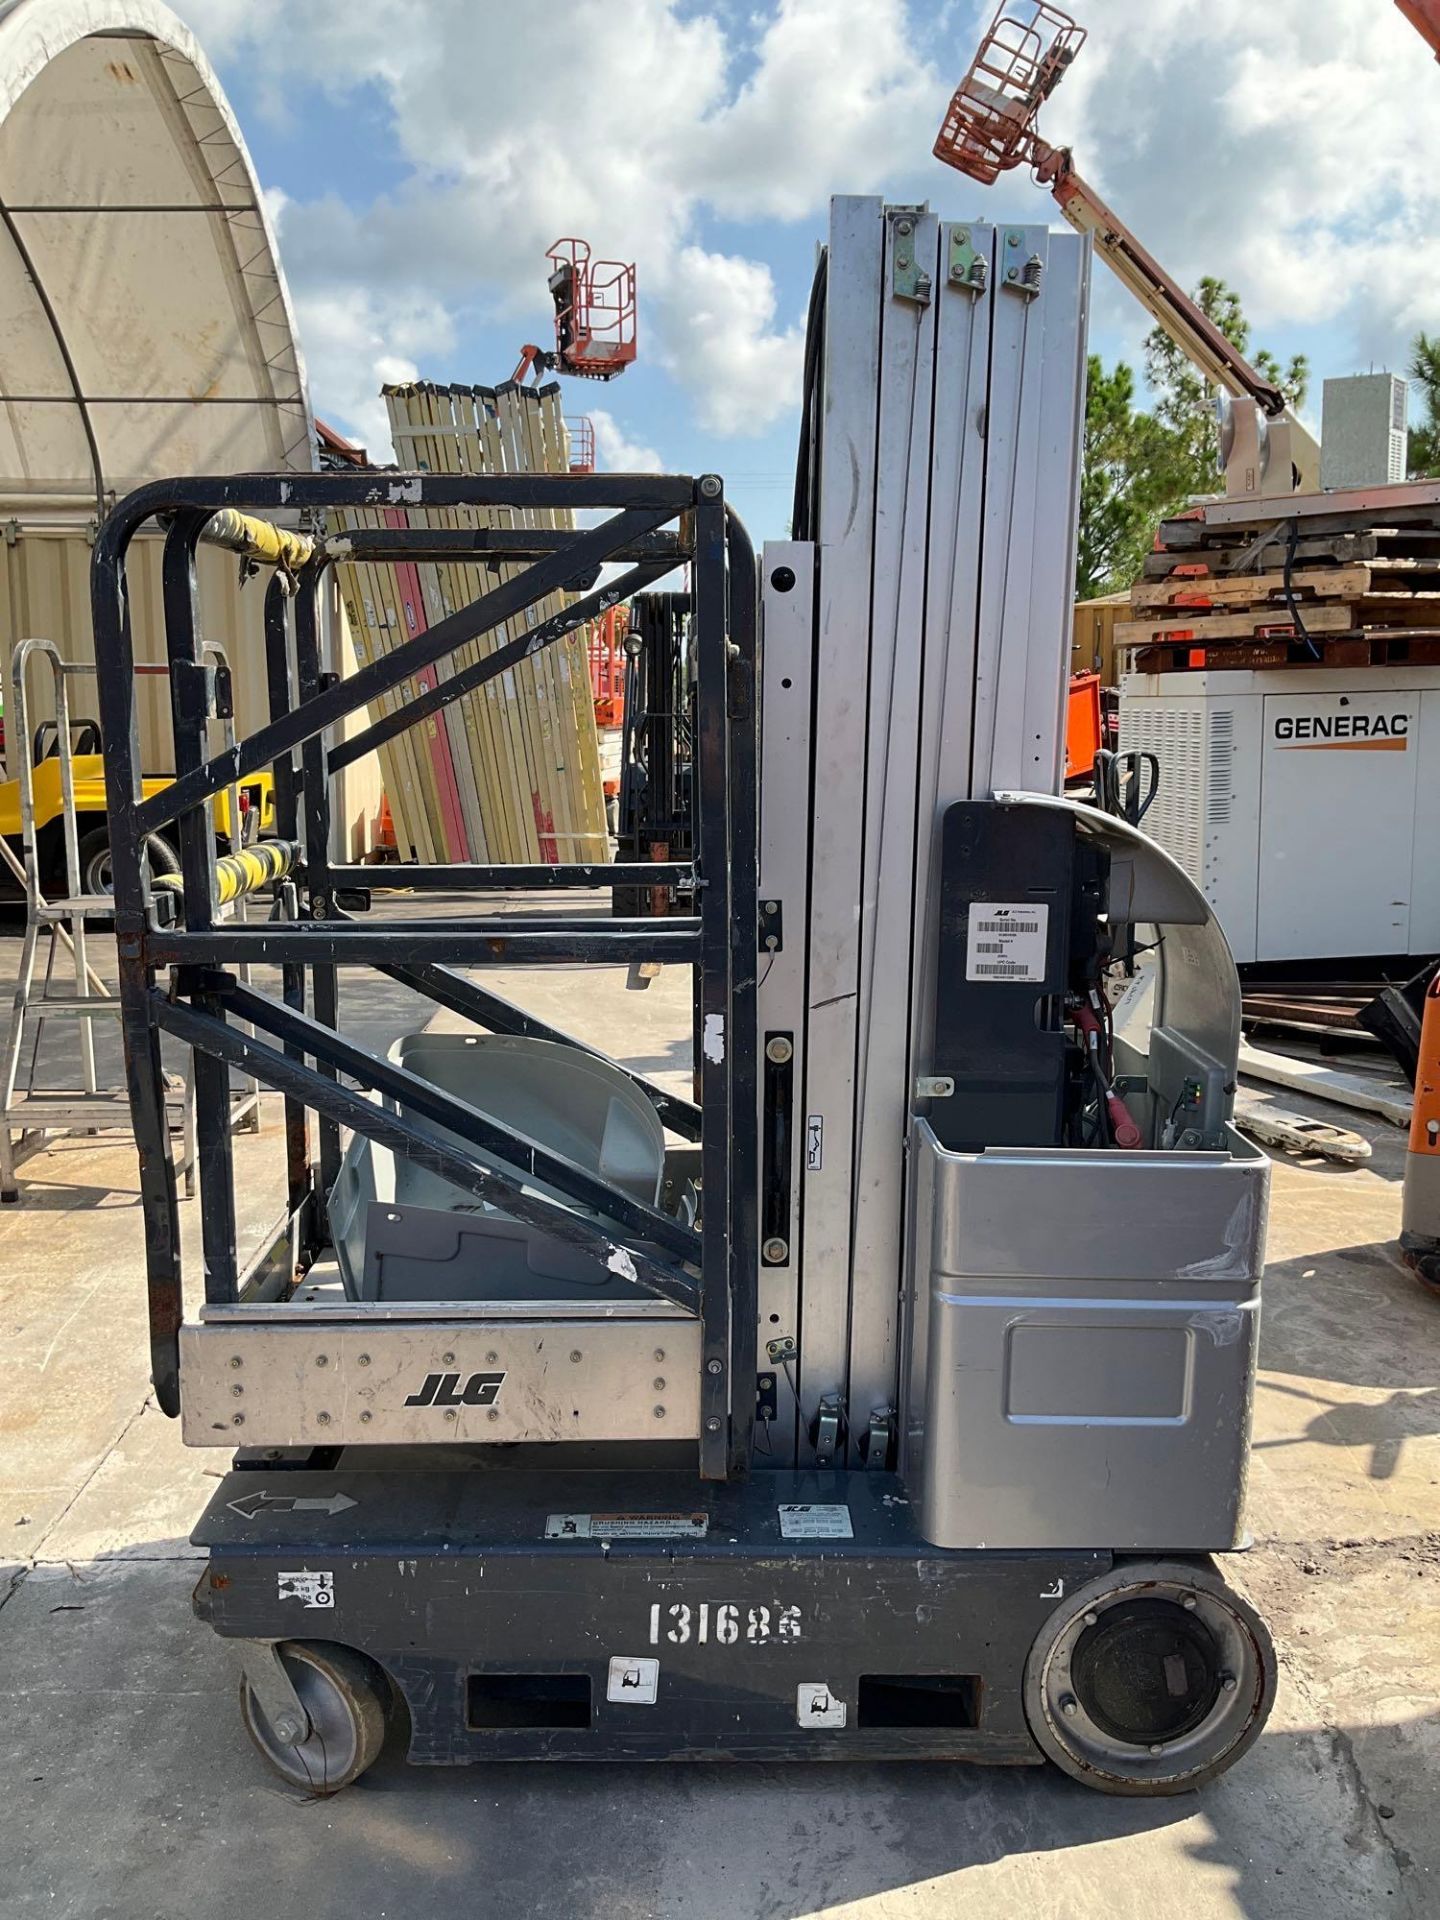 JLG MANLIFT MODEL 20MVL, ELECTRIC, APPROX MAX PLATFORM HEIGHT 20FT, NON MARKING TIRES, BUILT IN - Image 4 of 10